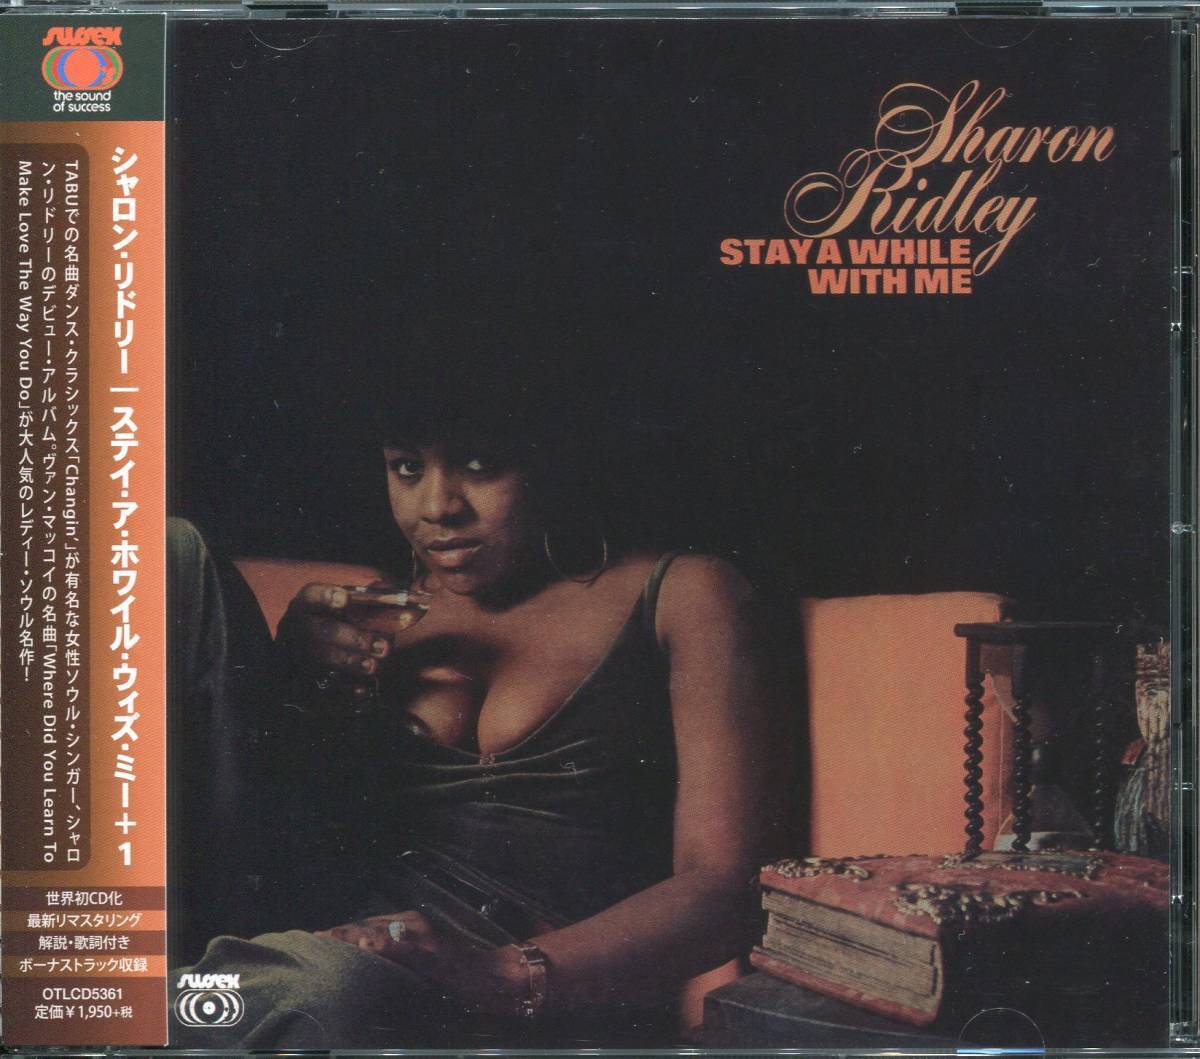 Rare Groove/メロウソウル■SHARON RIDLEY / Stay A While With Me +1 (1971) 廃盤 世界初CD化! Van McCoyプロデュース! リマスタリング_画像1